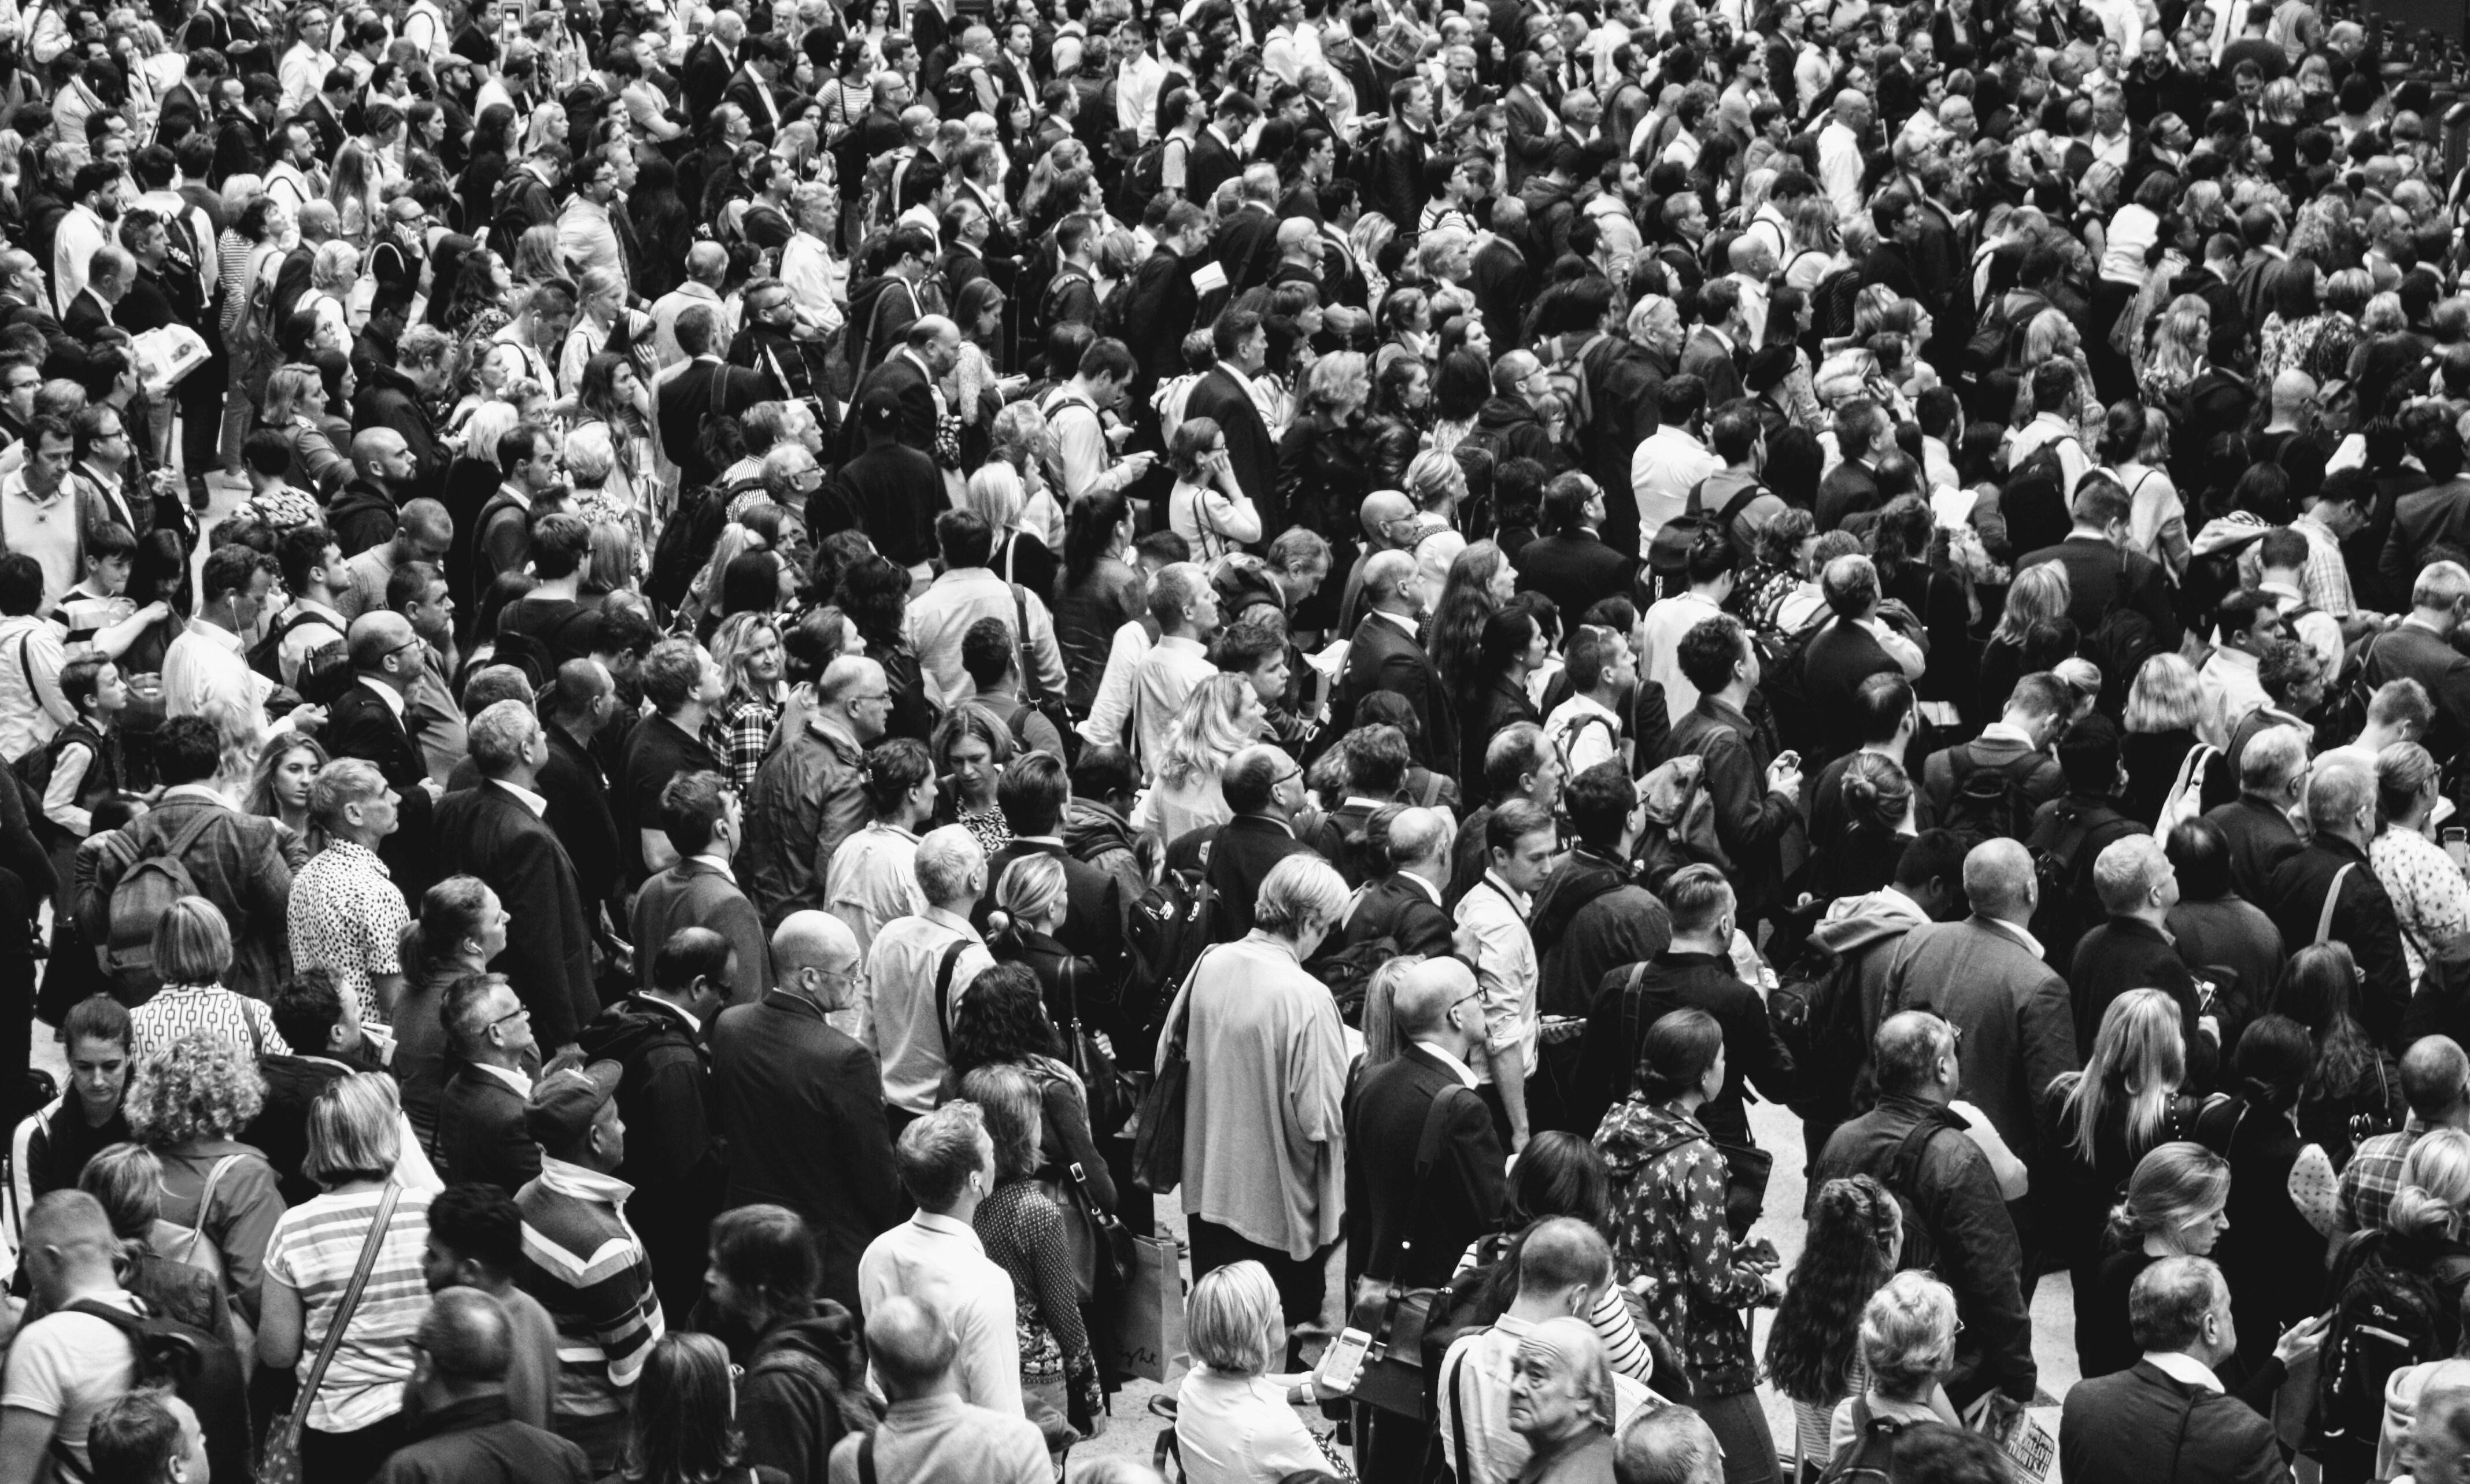 Black and white image of a large crowd of people.